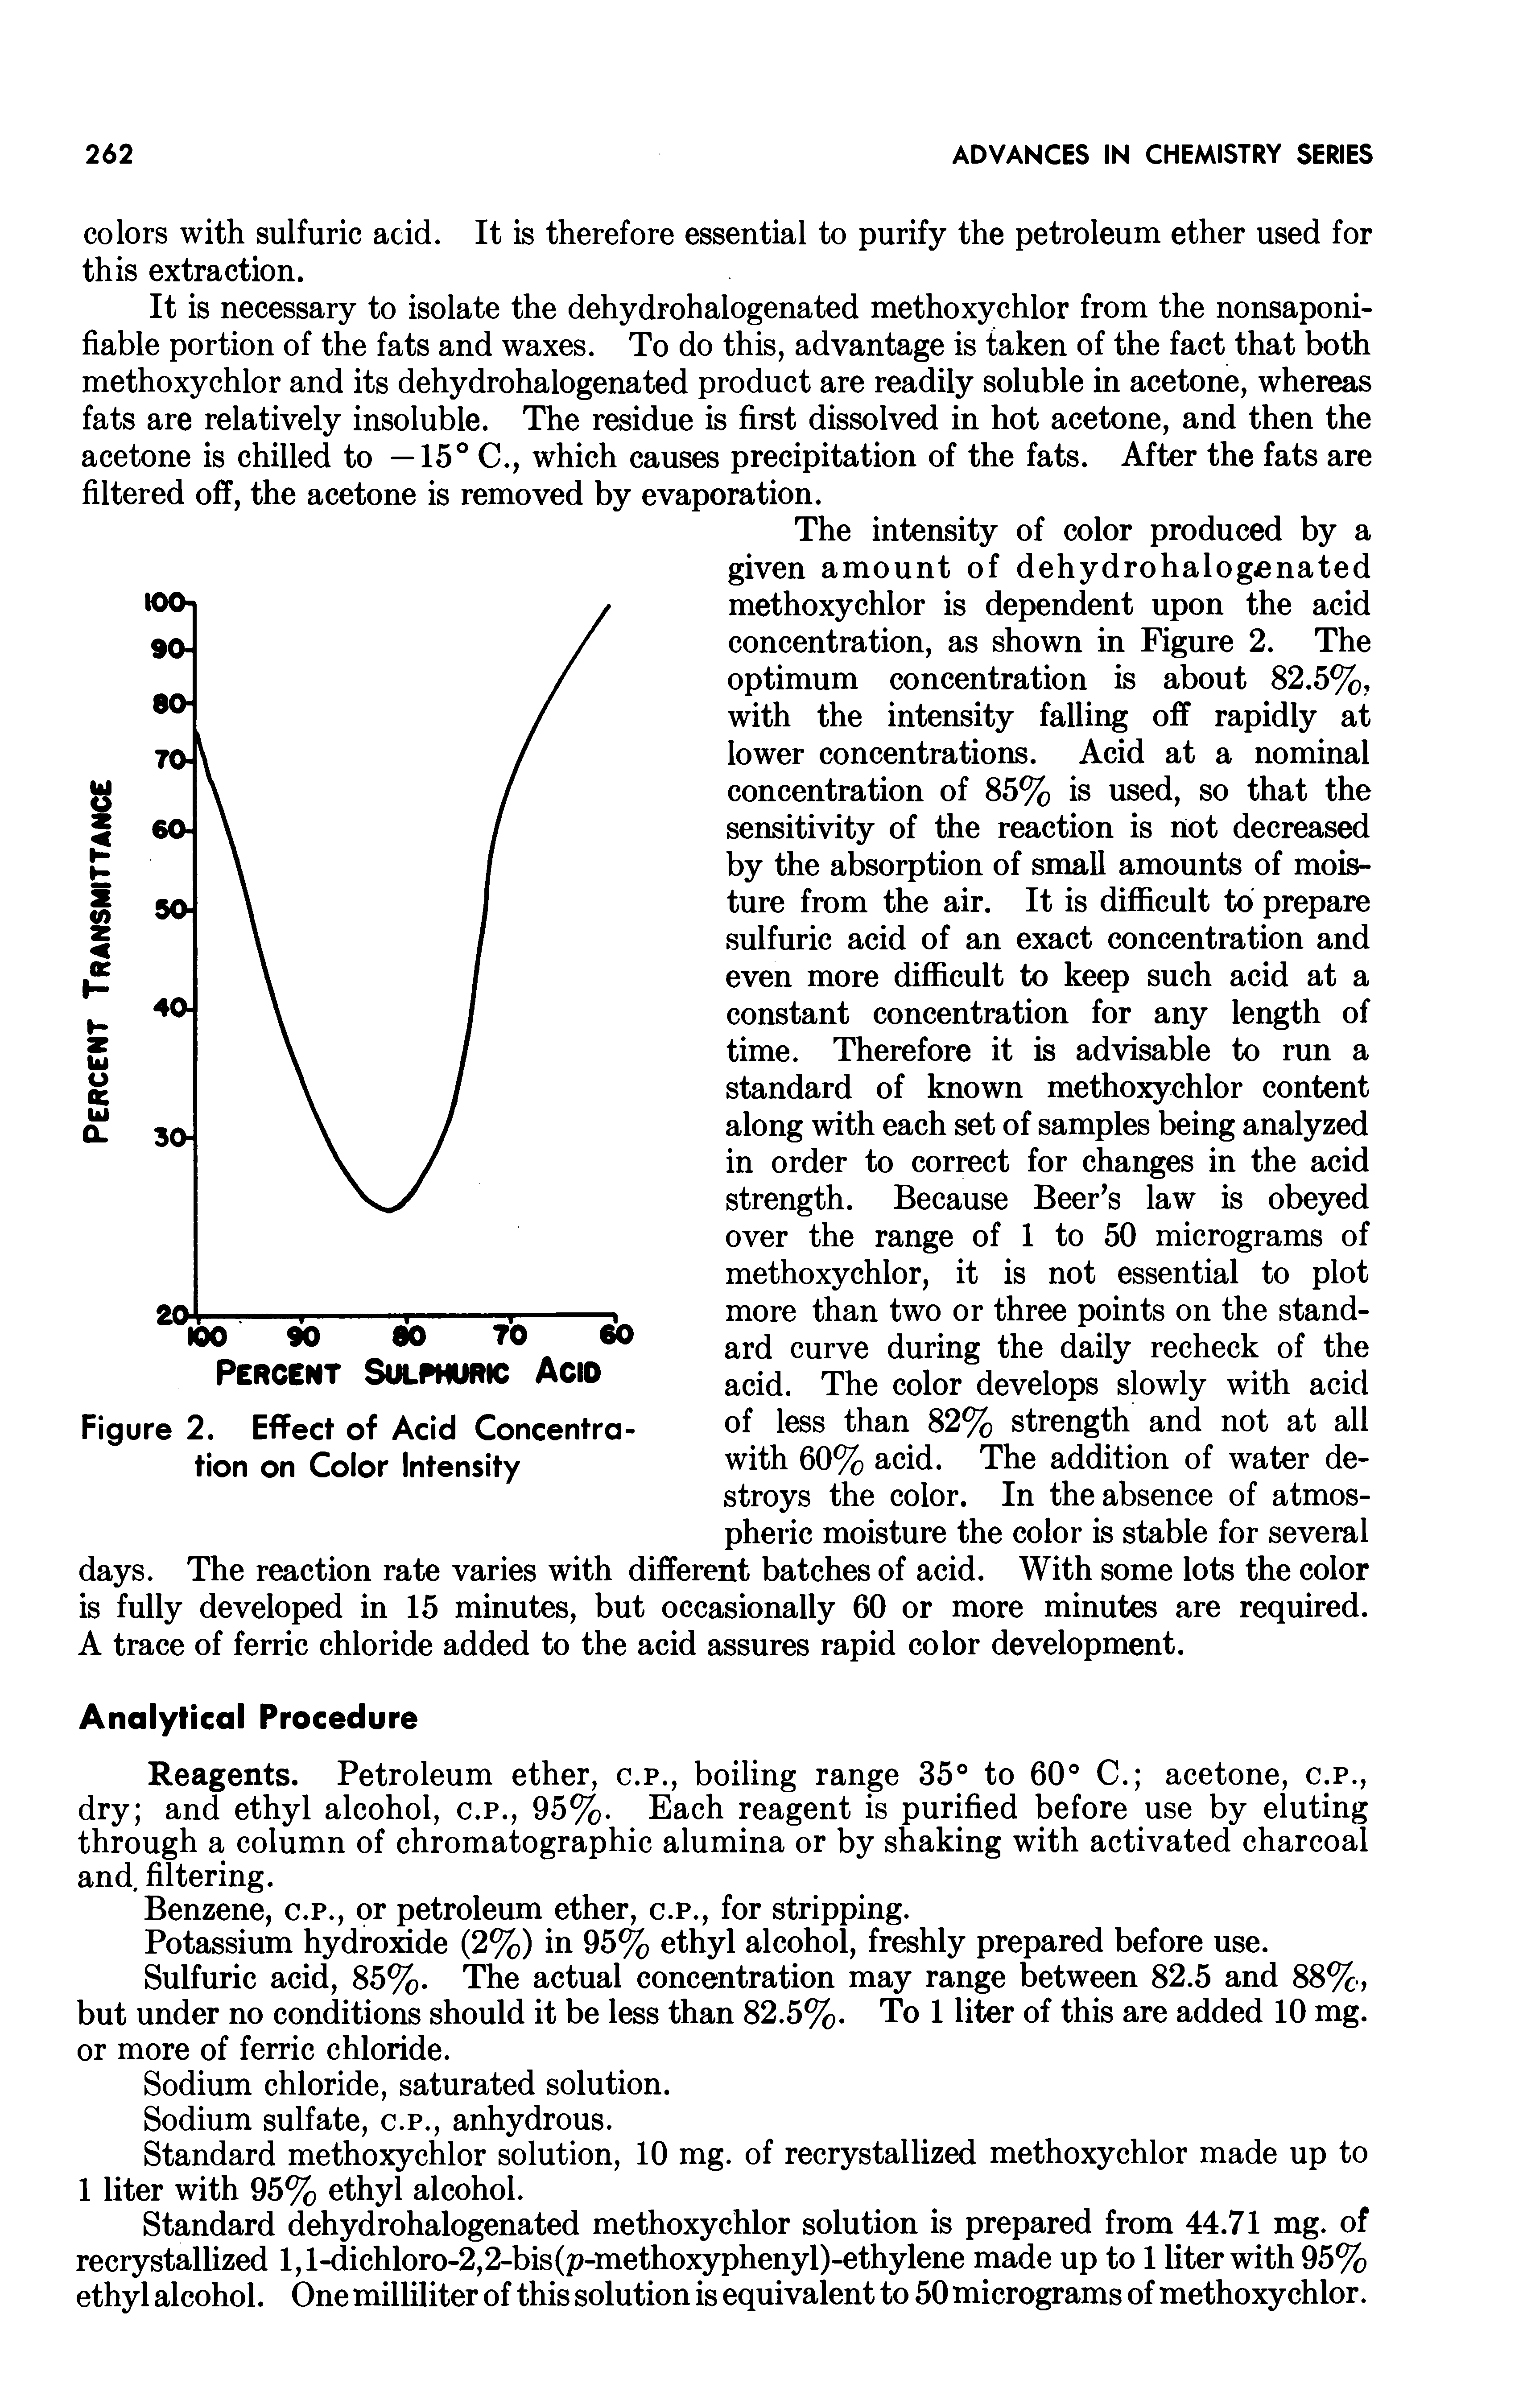 Figure 2. Effect of Acid Concentration on Color Intensity...